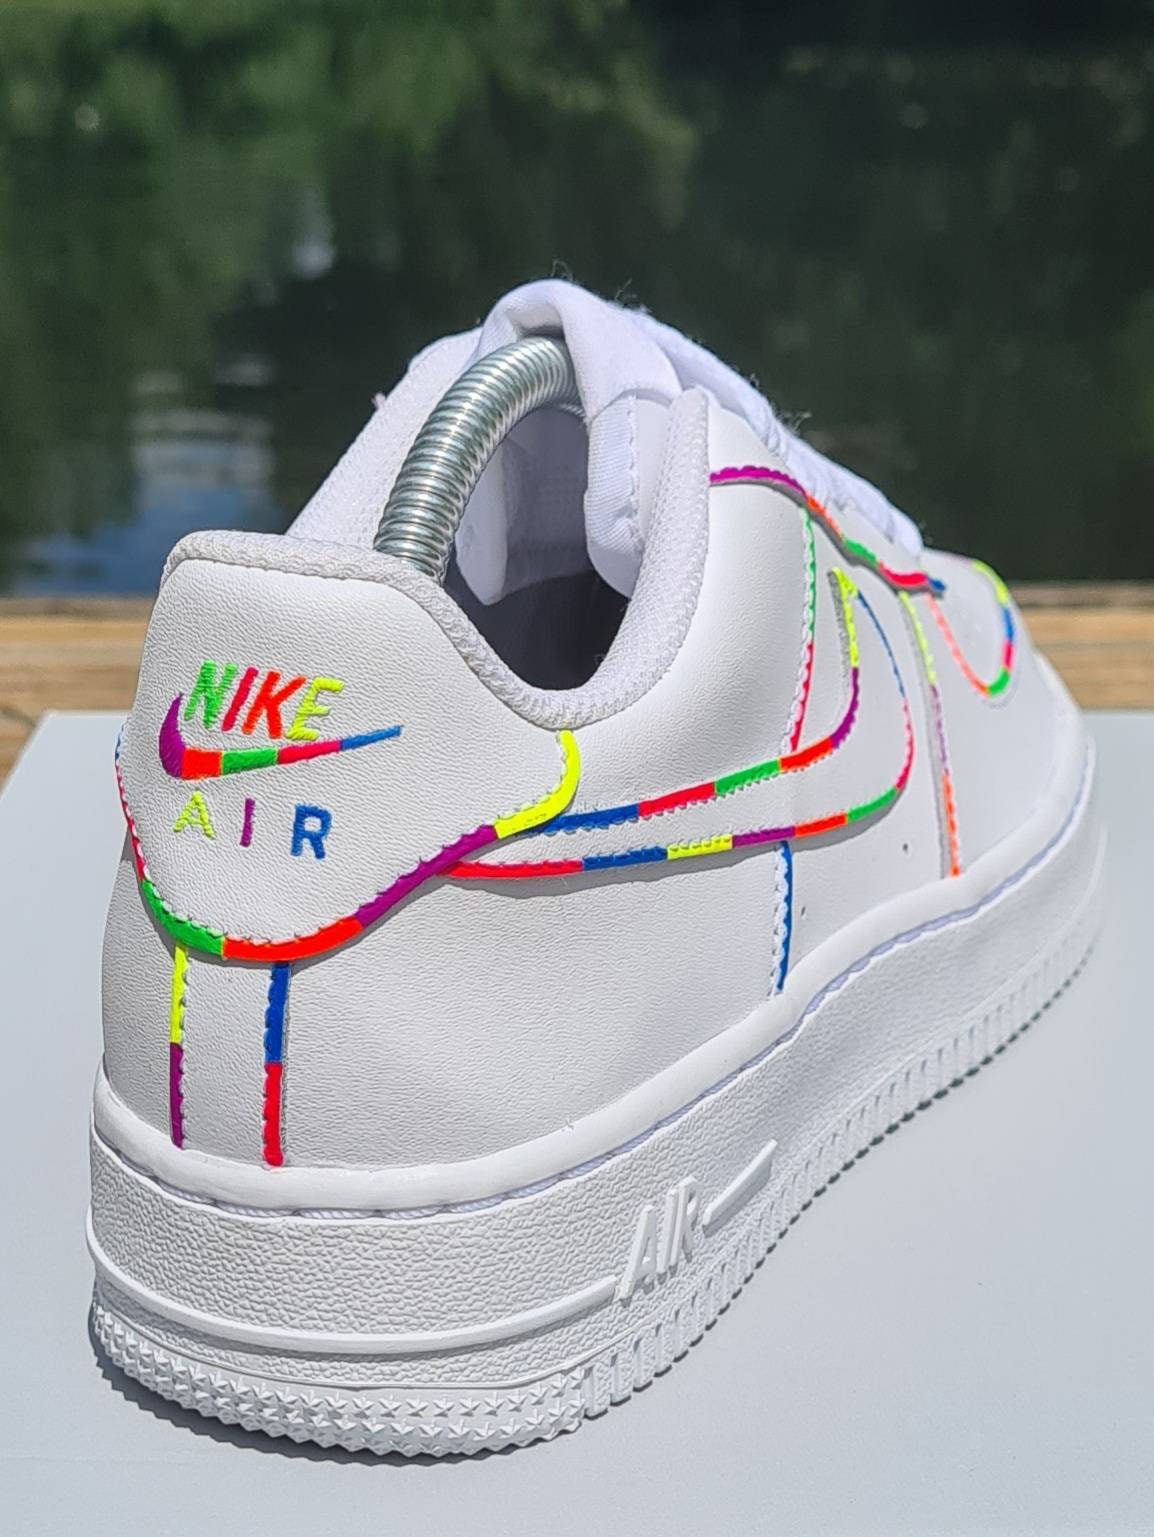 Custom Air Force 1 trainers nike neon rainbow outline af1 | Etsy